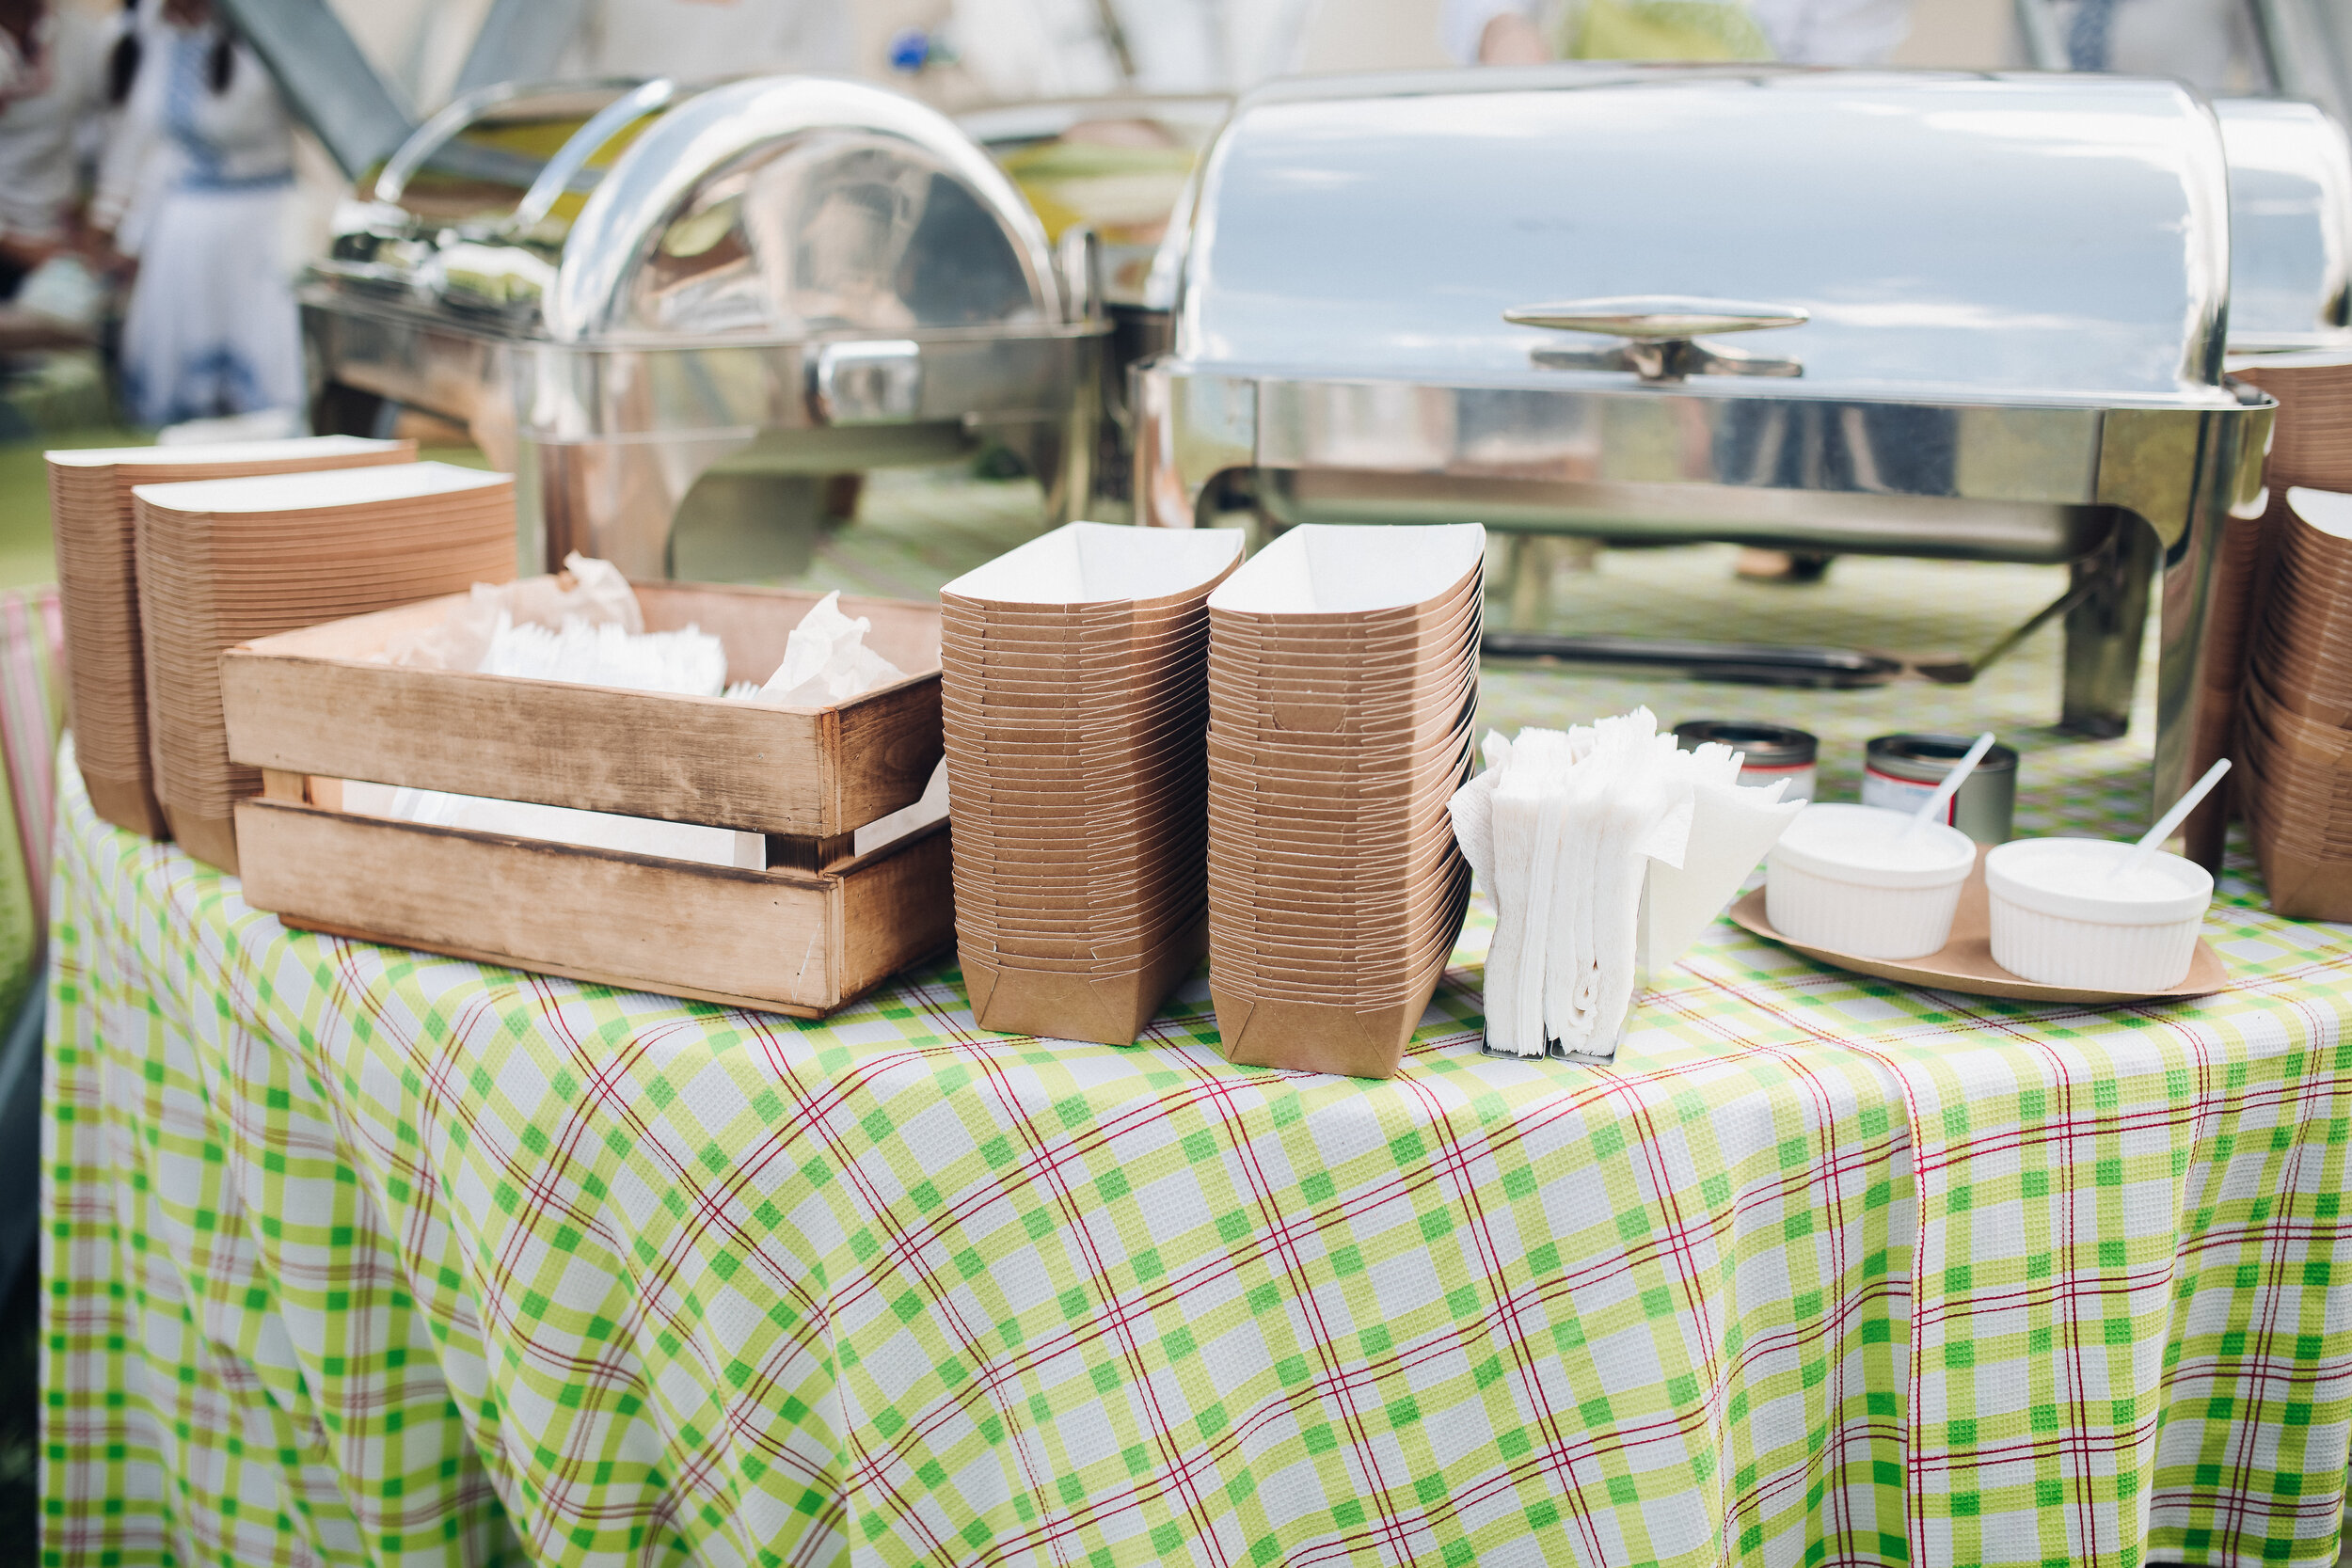 Stock photo of paper recyclable containers in stacks on the table over patterned green and white tablecloth. Box of napkins and utensils. Outdoor food festival.